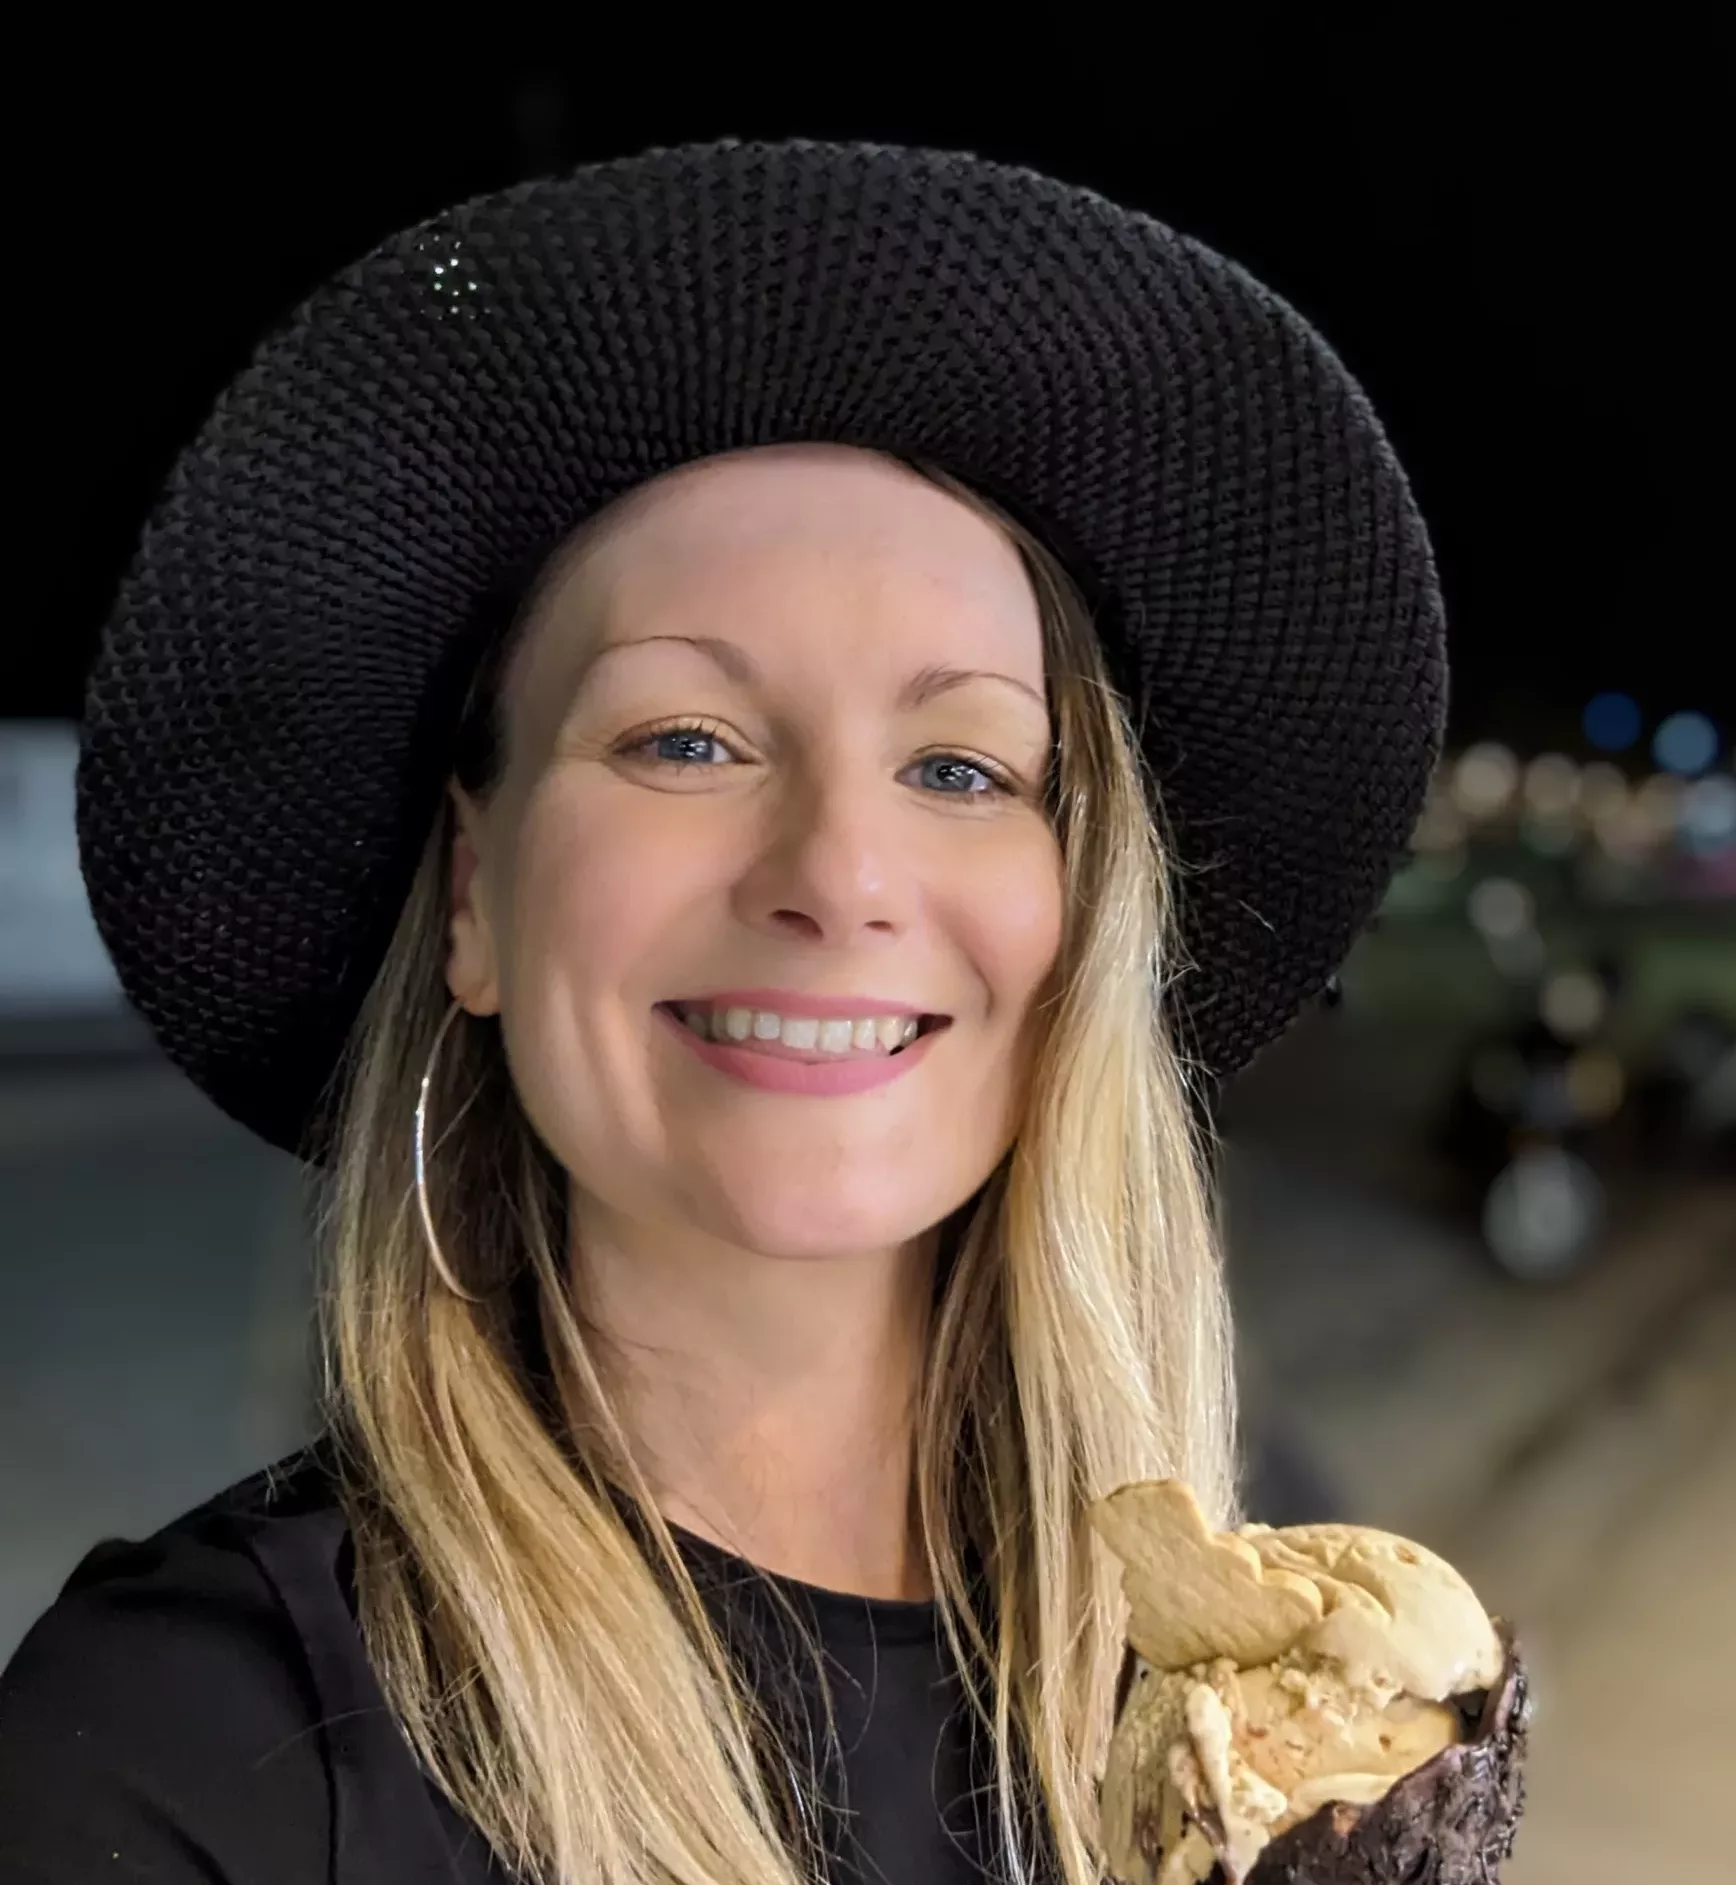 Frances Murphy is a white woman with blonde hair and blue eyes. She is holding an ice cream whilst smiling at the camera.